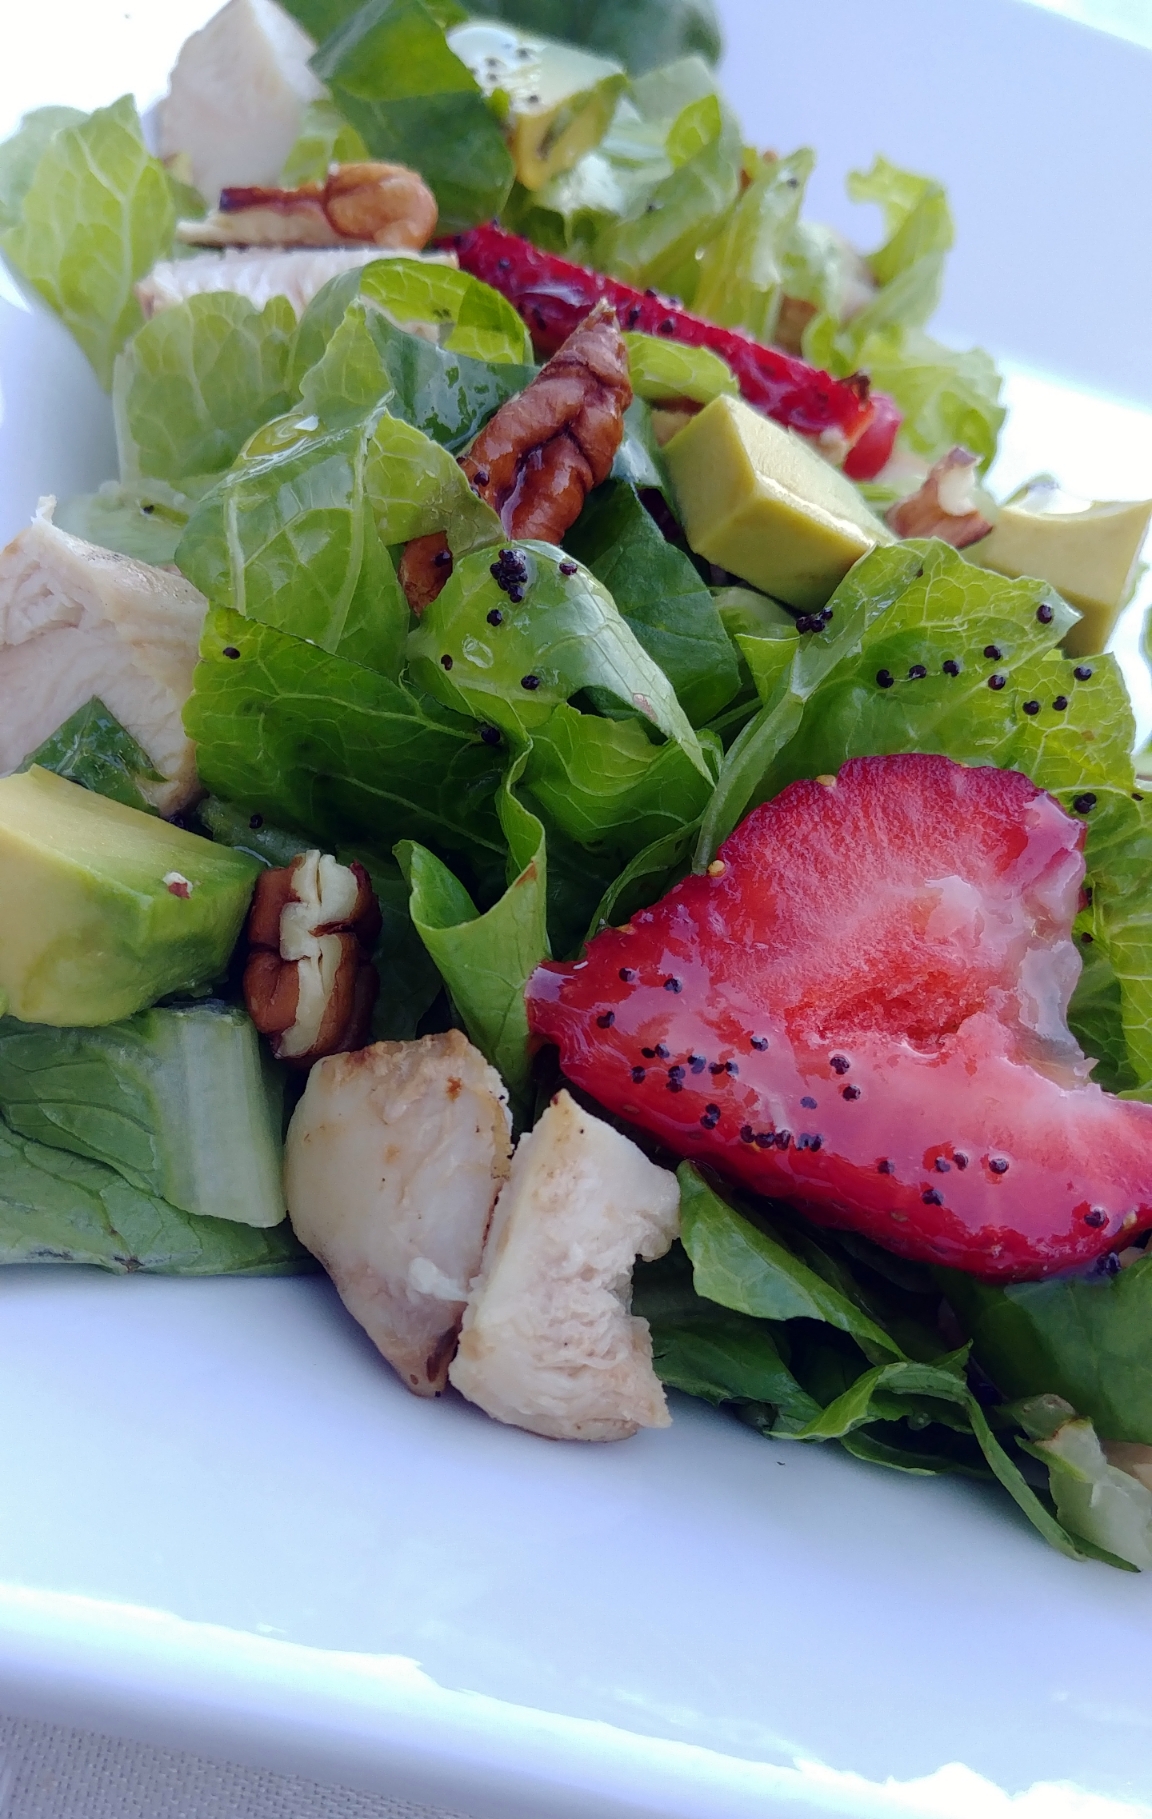 Grilled Chicken Salad with Strawberries and Avocado